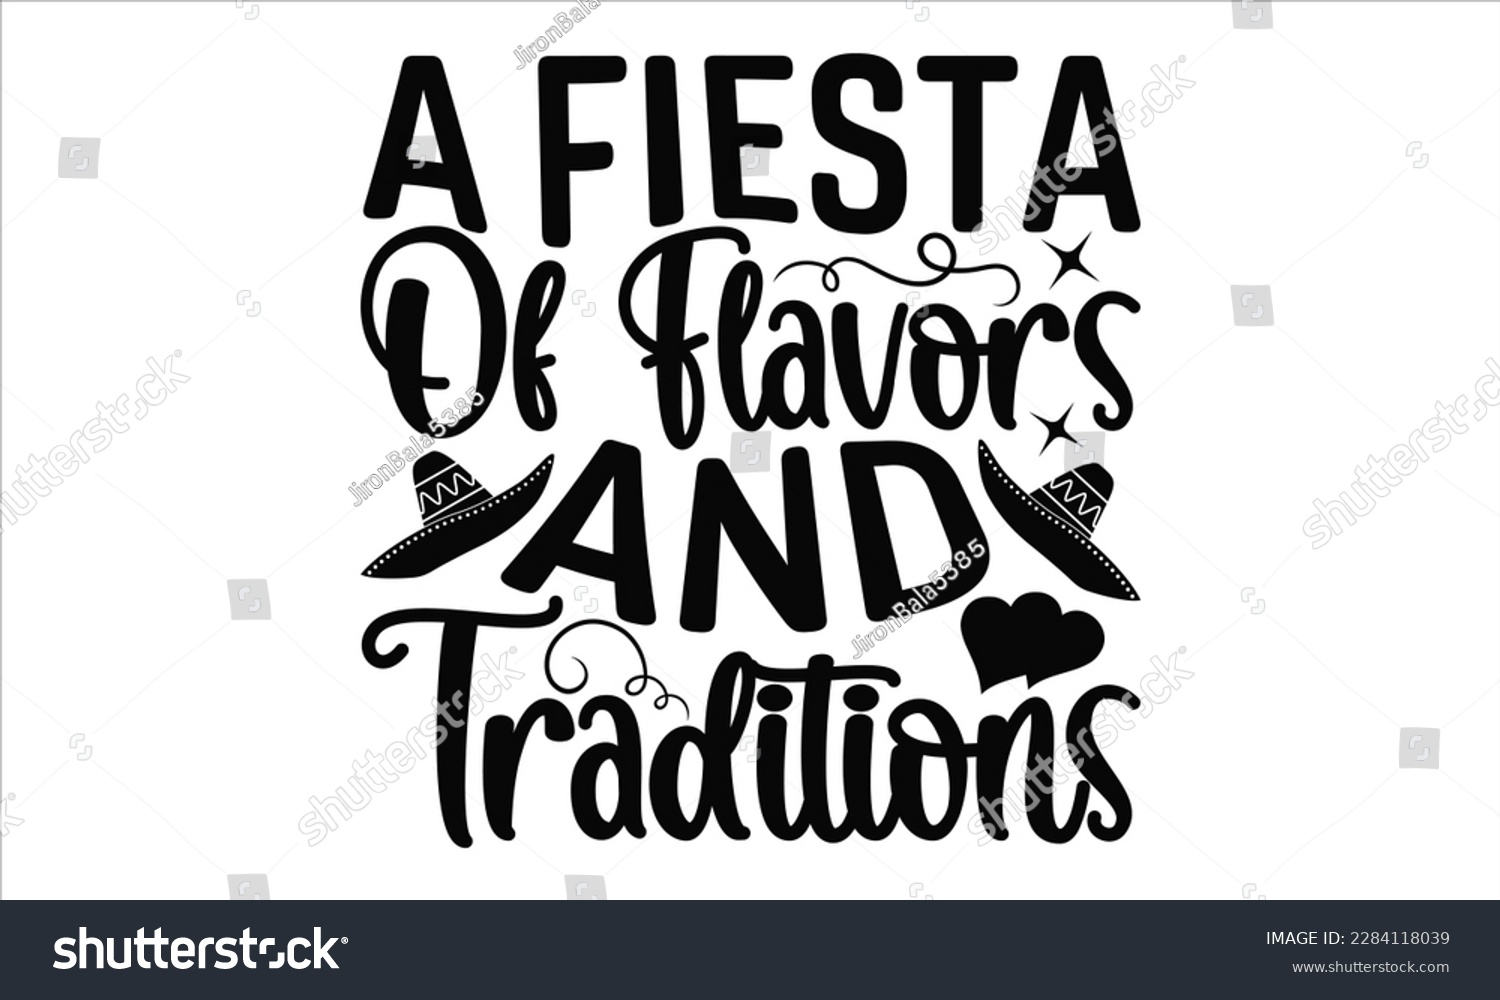 SVG of A Fiesta Of Flavors And Traditions - Cinco De Mayo SVG Design, Hand drawn lettering phrase, Hand drawn vintage illustration with hand-lettering and decoration elements. svg